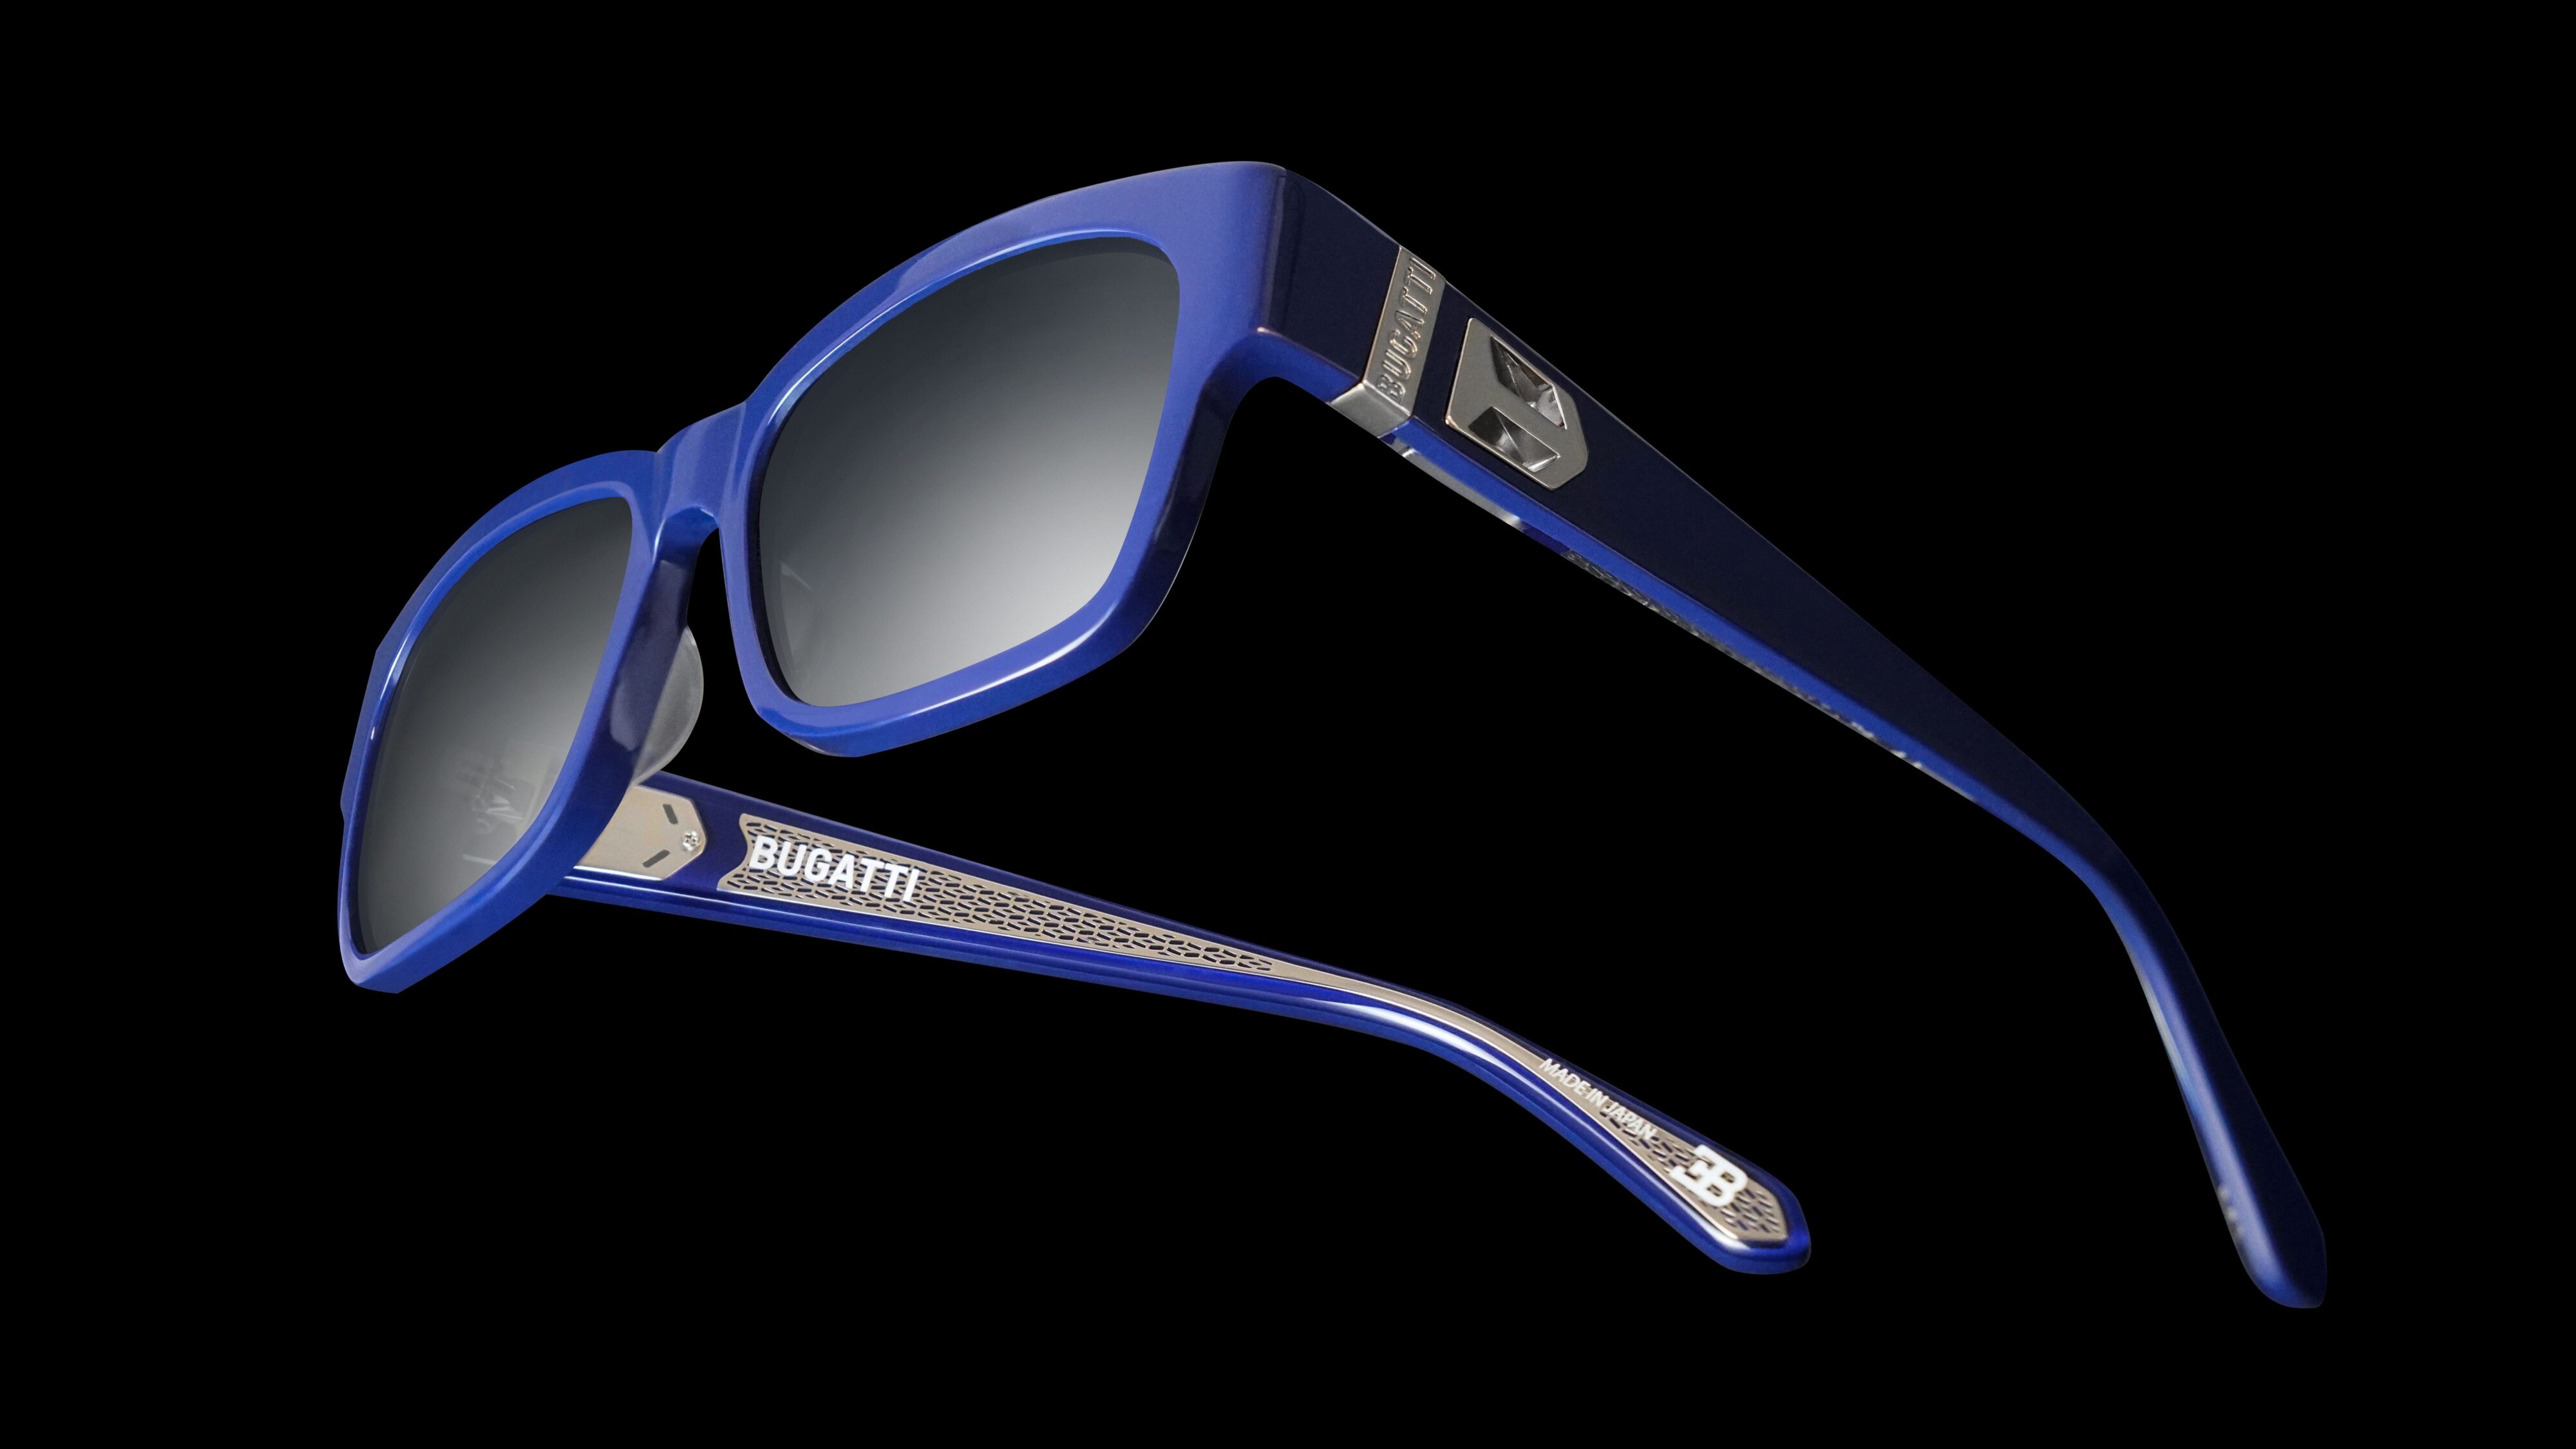 Dubbed "29", this piece from the Bugatti Eyewear collection is painted in Dark Blue and finished in 925 Sterling Silver